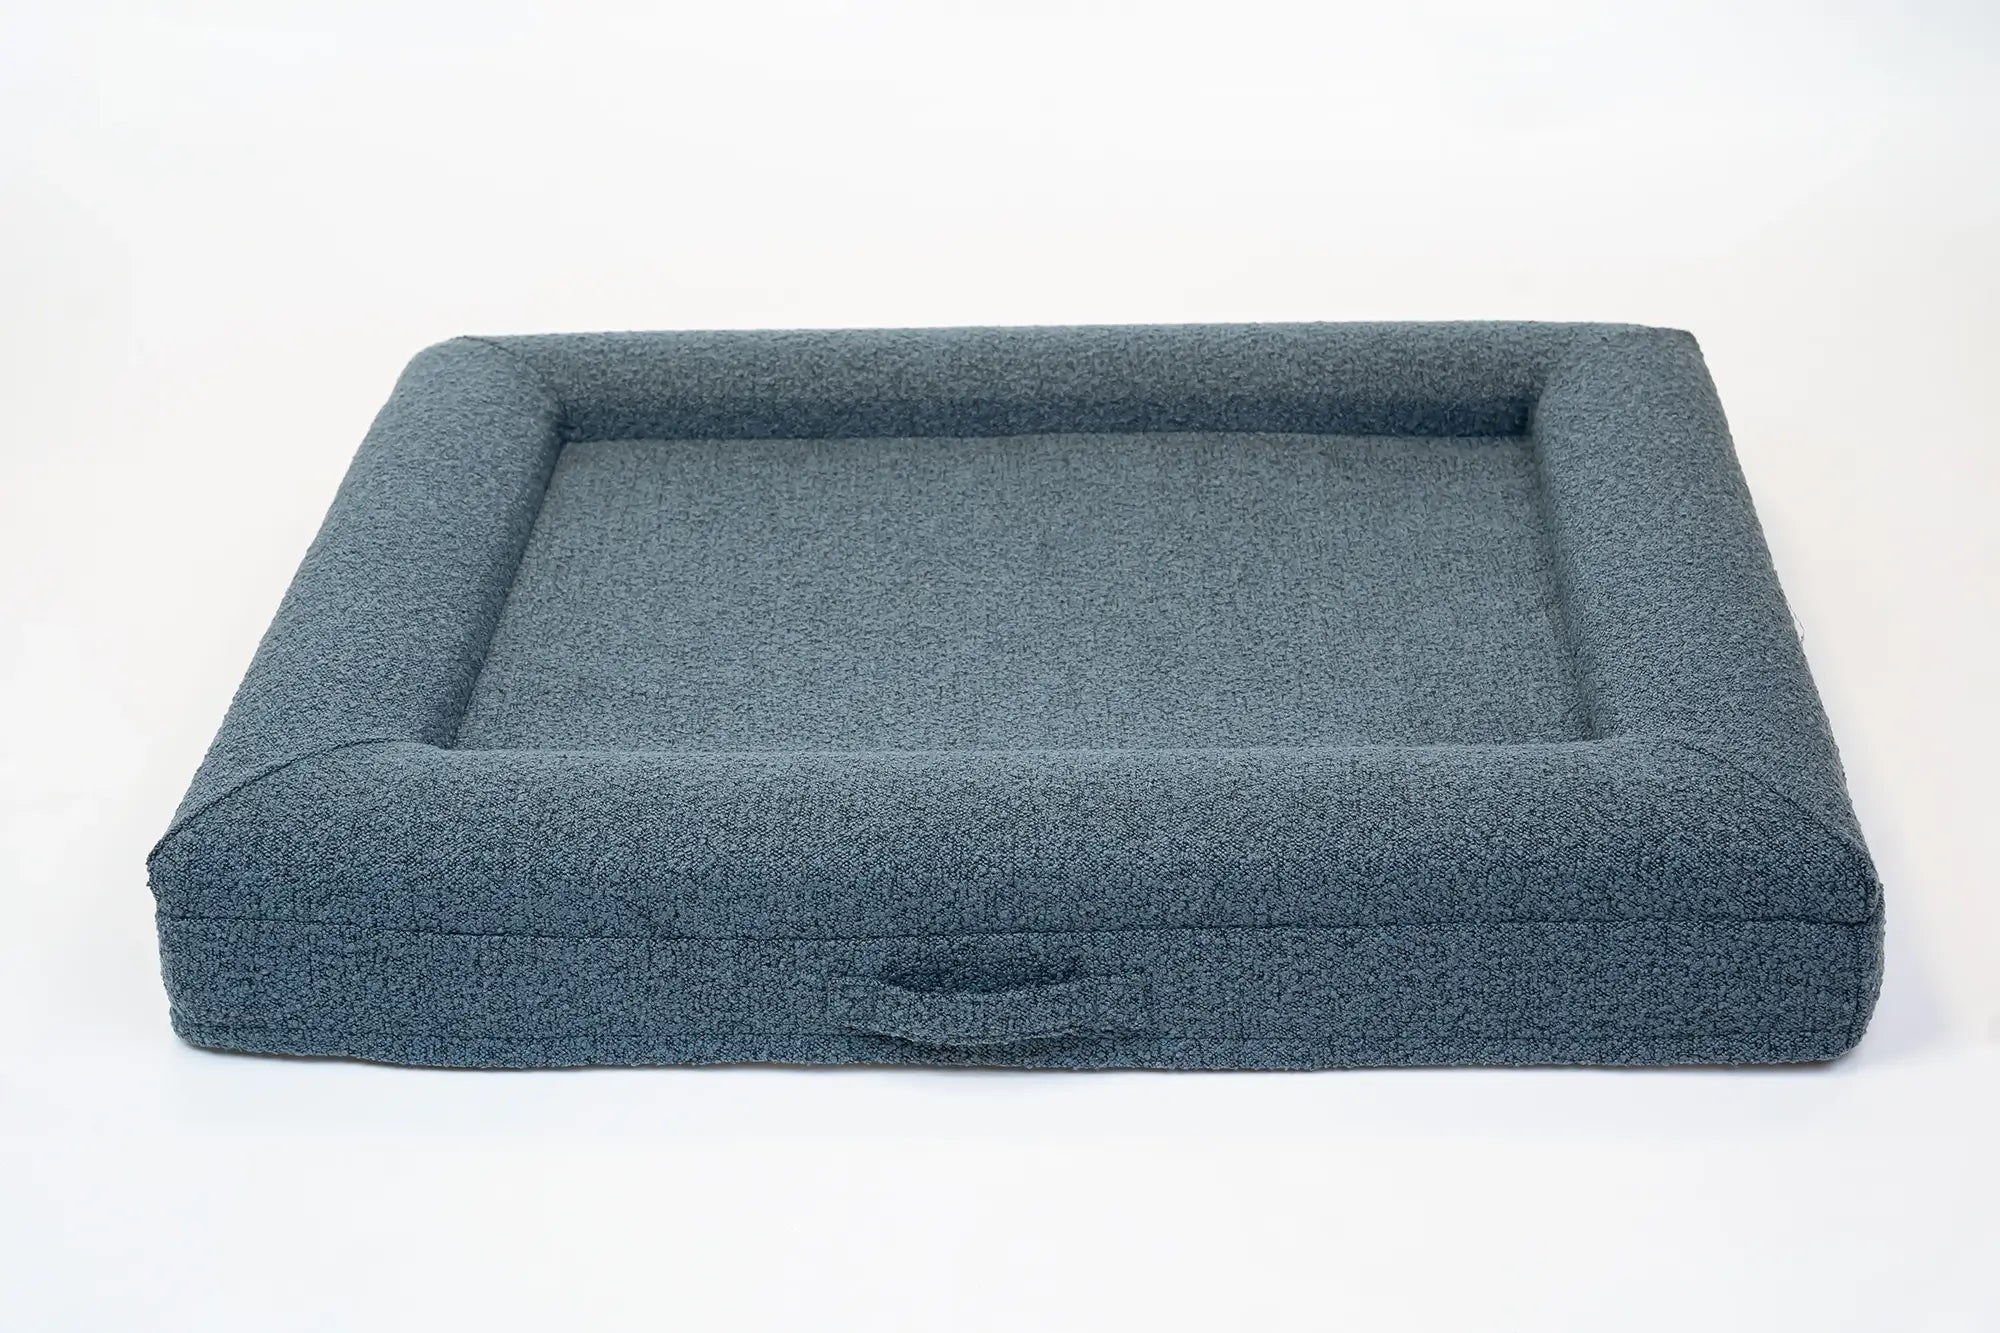 Back of a large, ocean blue-colored orthopedic memory foam boucle dog bed with bolsters and a handle for easy transport.